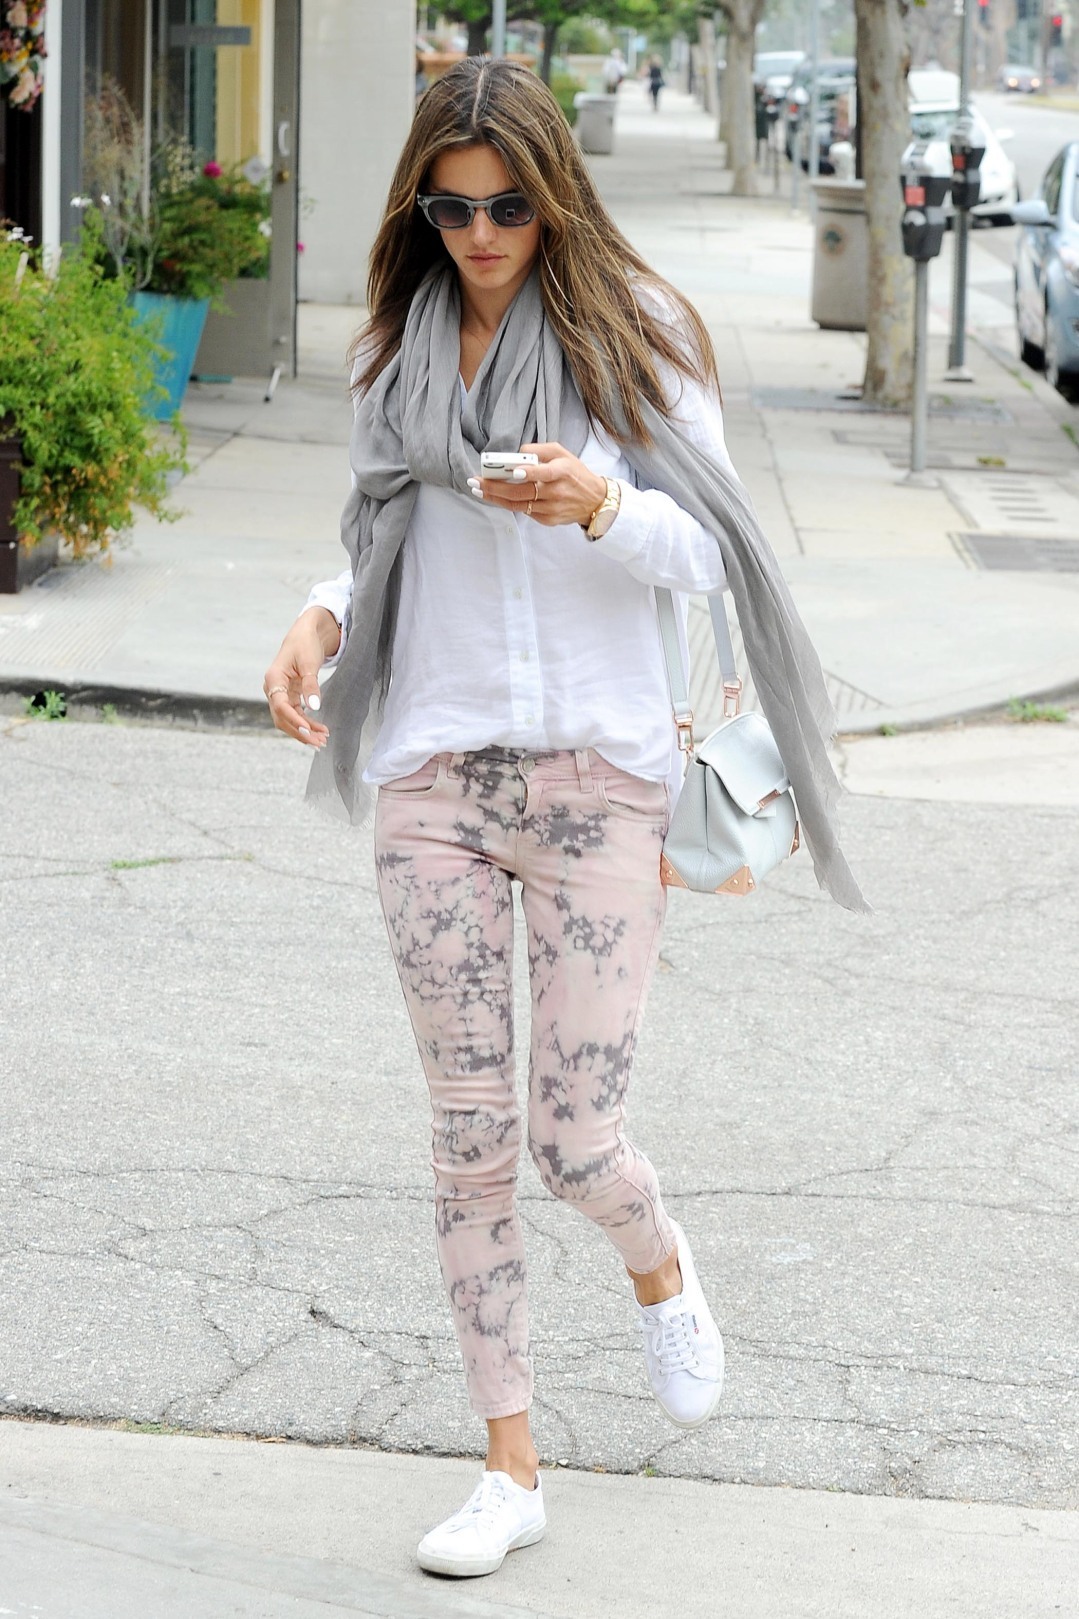 Alessandra Ambrosio Goes Out for Coffee in Los Angeles